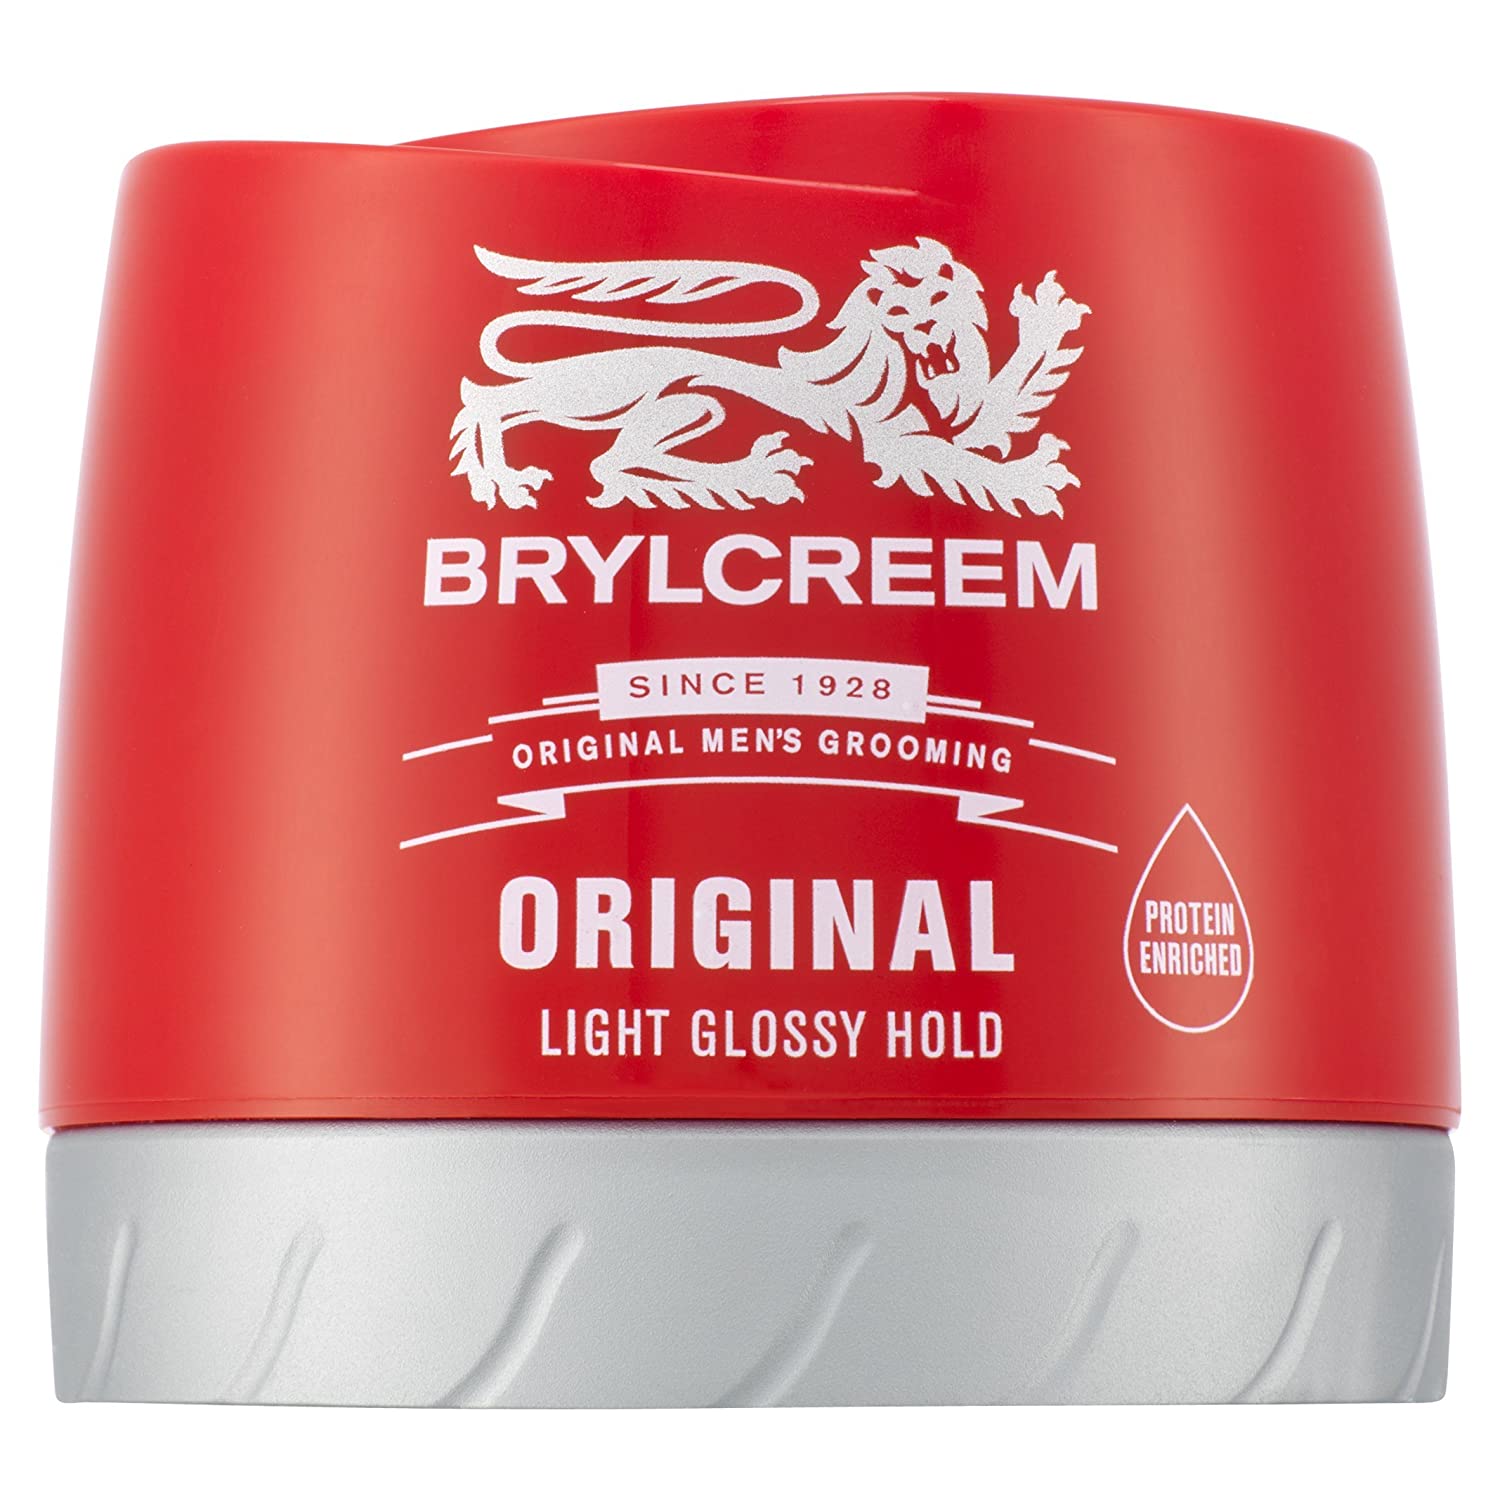 BRYLCREEM SINCE 1928 ORIGINAL MEN'S GROOMING - ORIGINAL LIGHT GLOSSY HOLD - PROTEIN ENRICHED / Vente En Gros